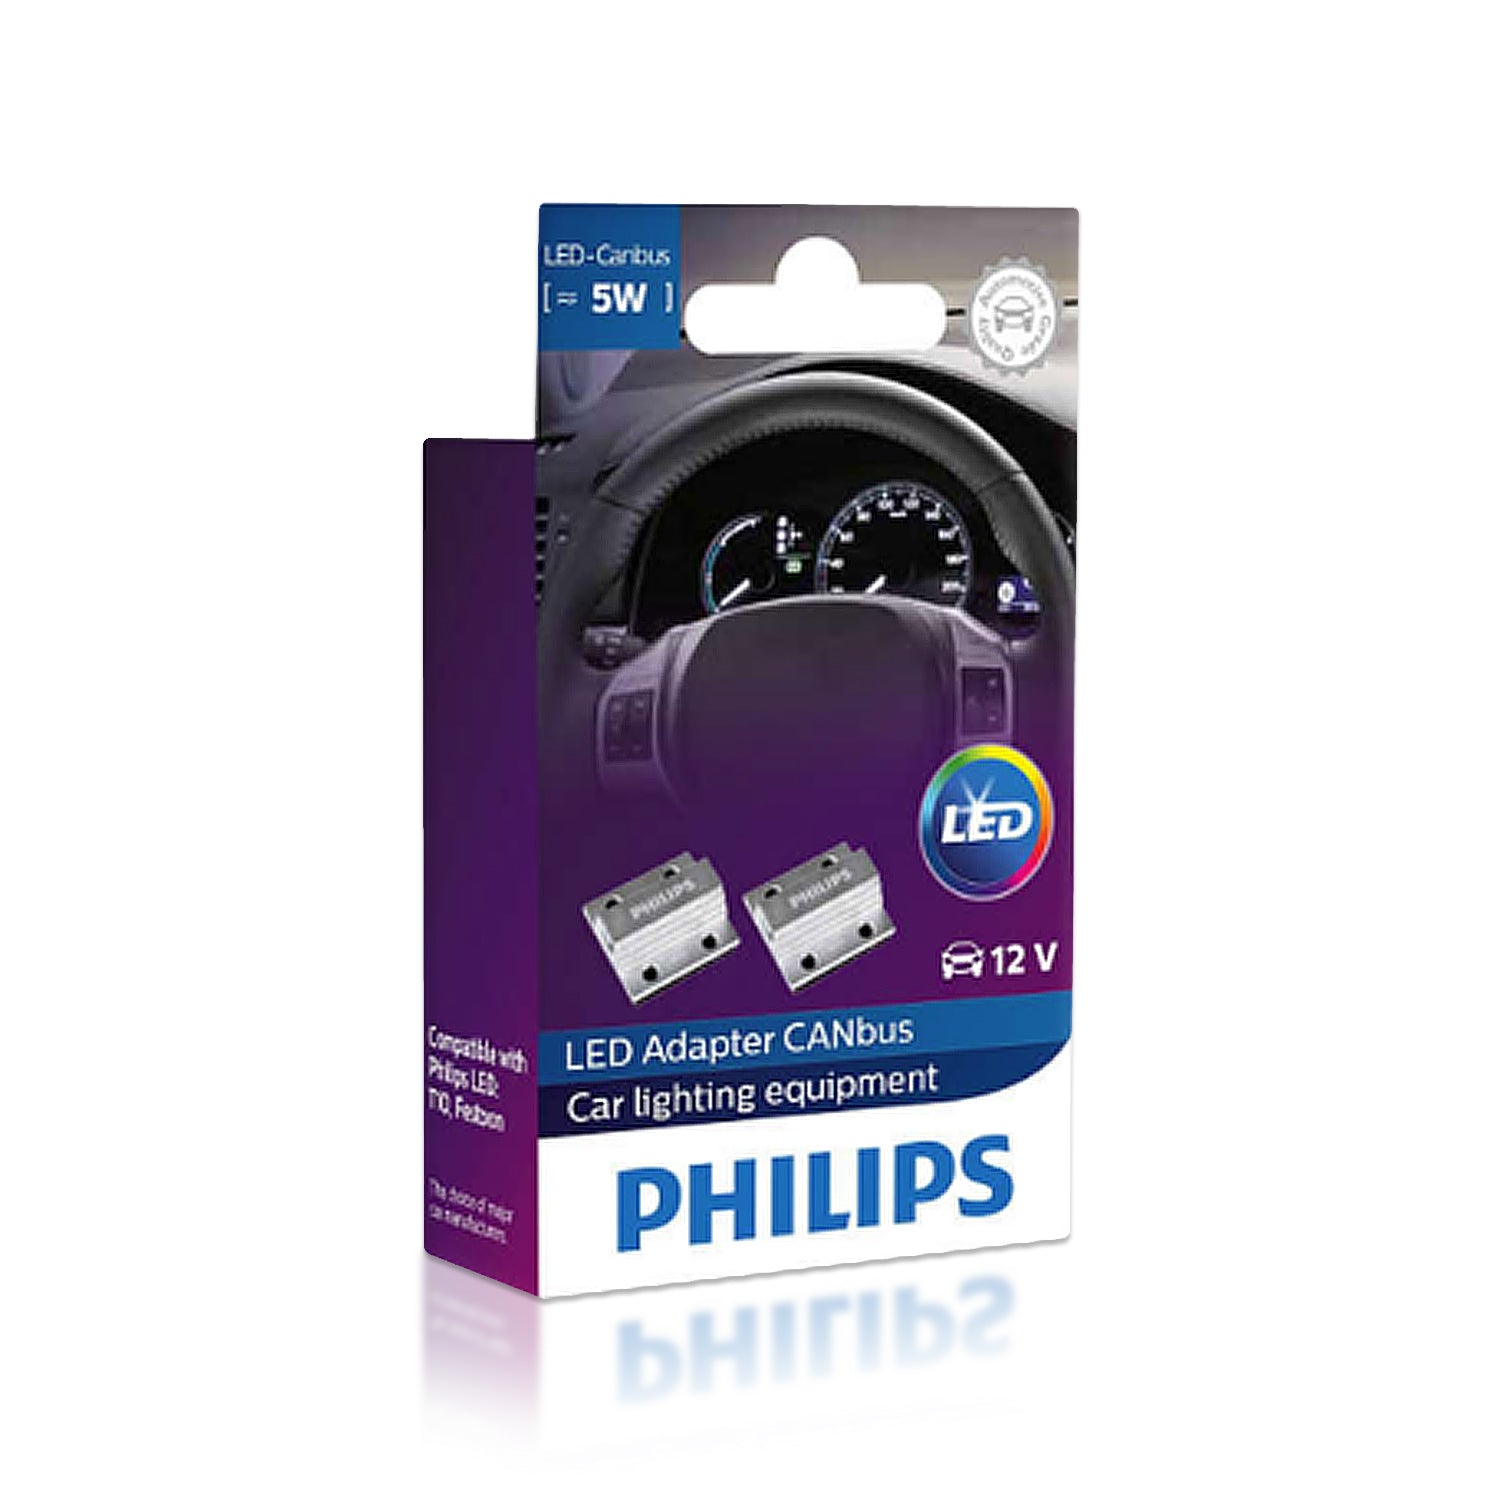 Genuine PHILIPS Headlight 12V H4 CANbus LED Adapter - Twin Pack